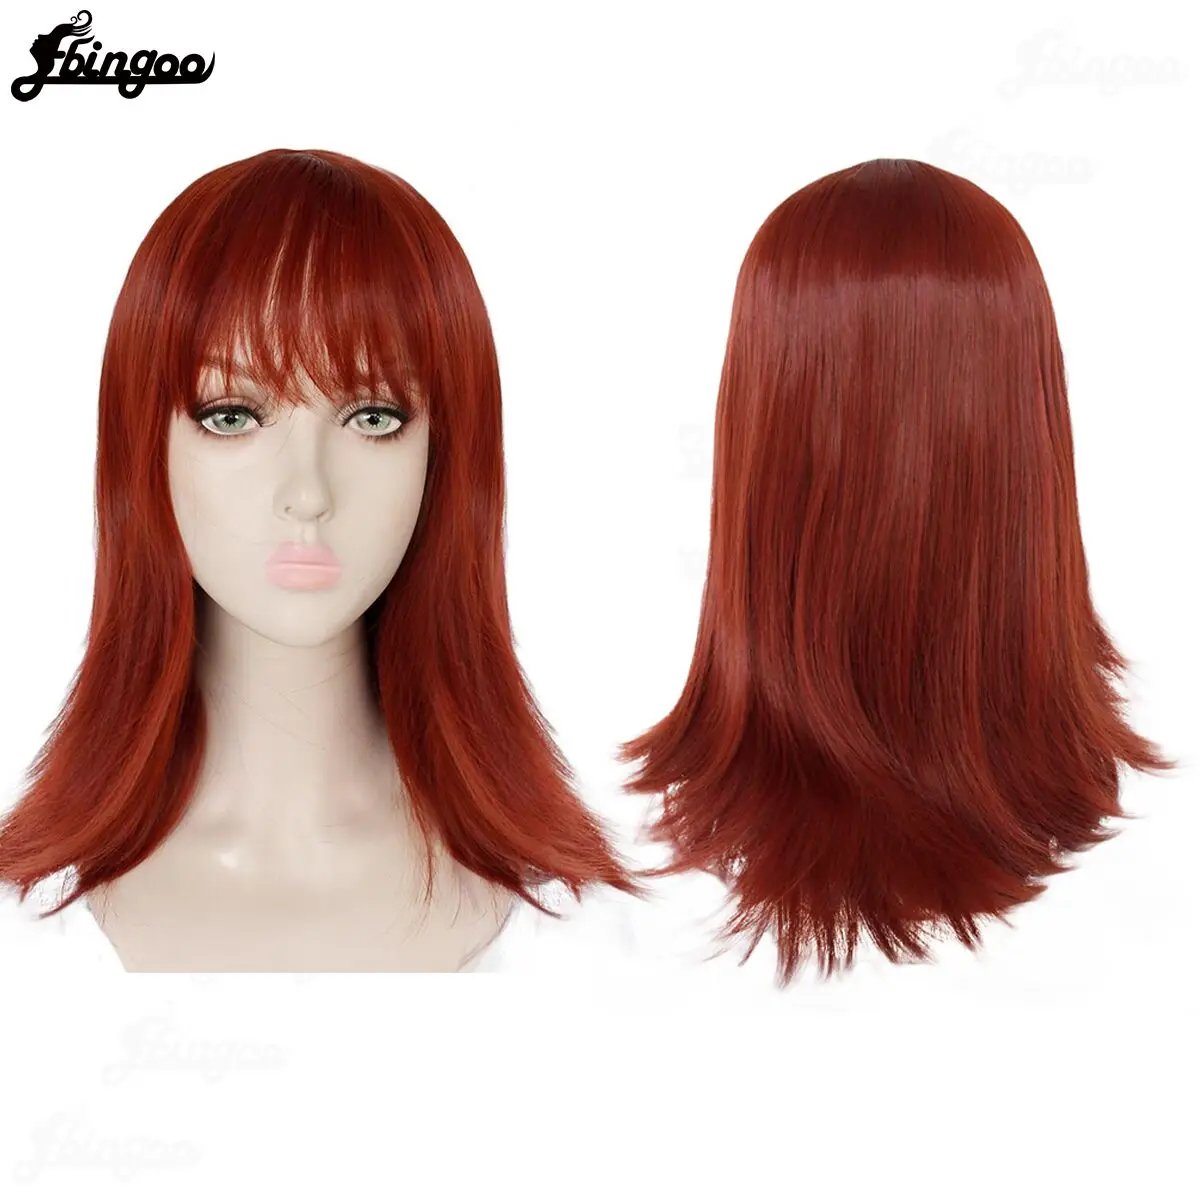 Ebingoo Synthetic Wig Copper Red Long Straight with Flat Bangs Heat Resistant Fiber Synthetic Machine Made Hair Wig Cosplay Wigs